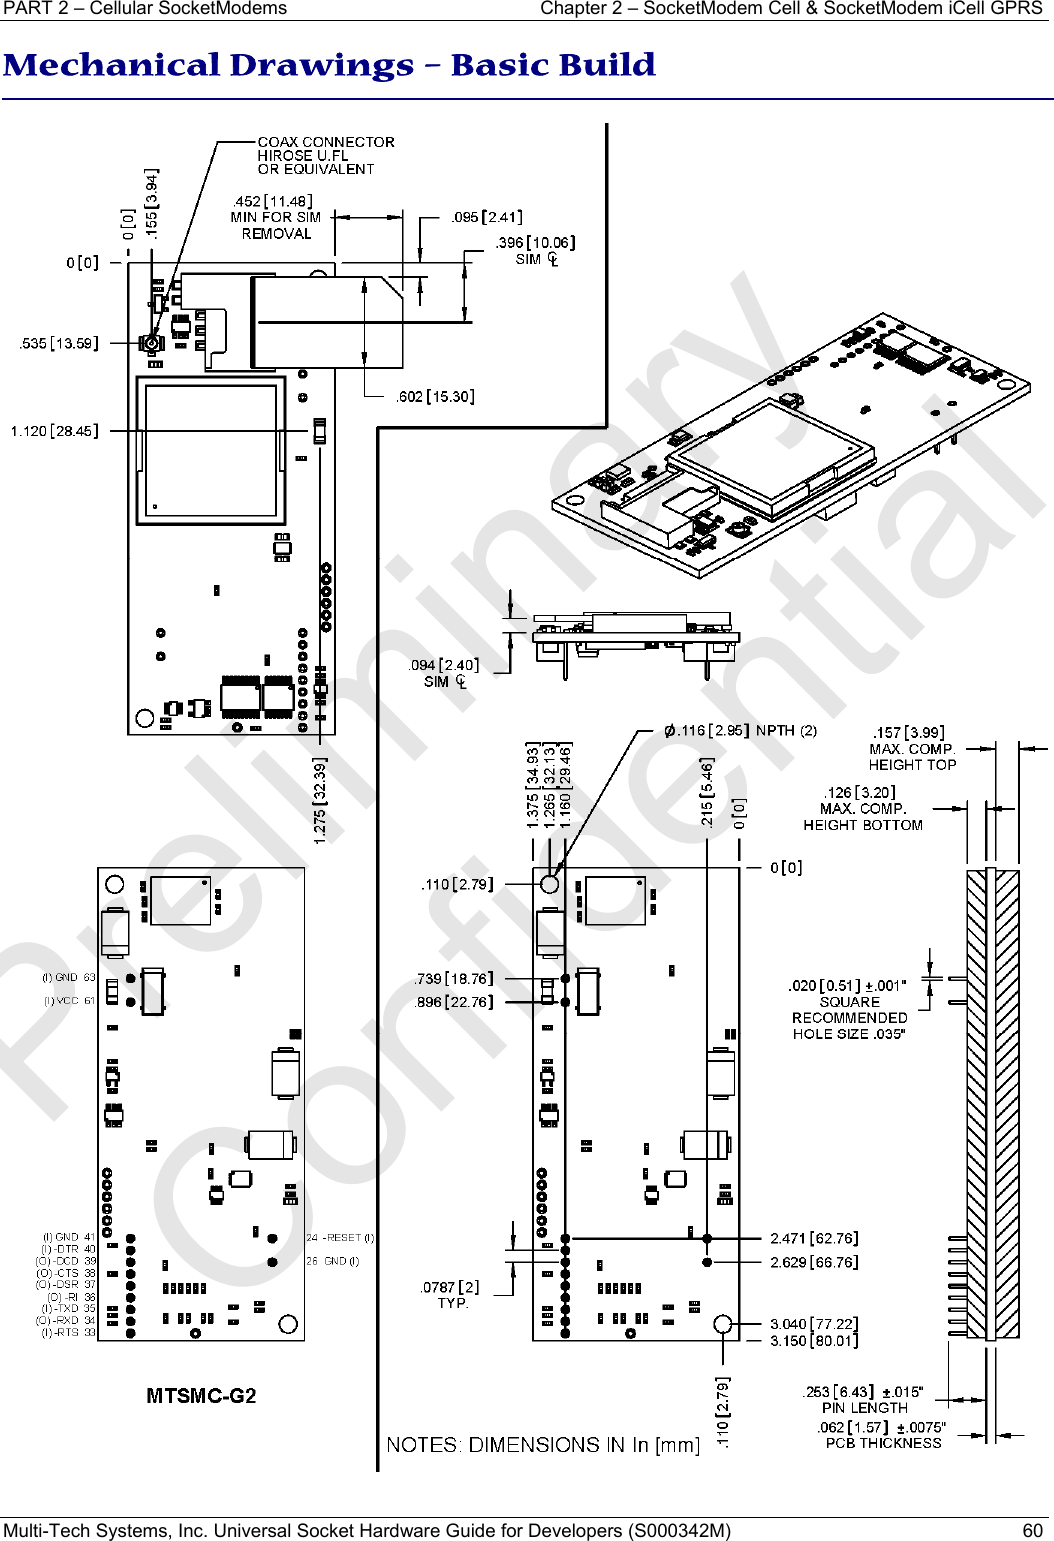 PART 2 – Cellular SocketModems   Chapter 2 – SocketModem Cell &amp; SocketModem iCell GPRS Multi-Tech Systems, Inc. Universal Socket Hardware Guide for Developers (S000342M)  60  Mechanical Drawings – Basic Build   Preliminary  Confidential